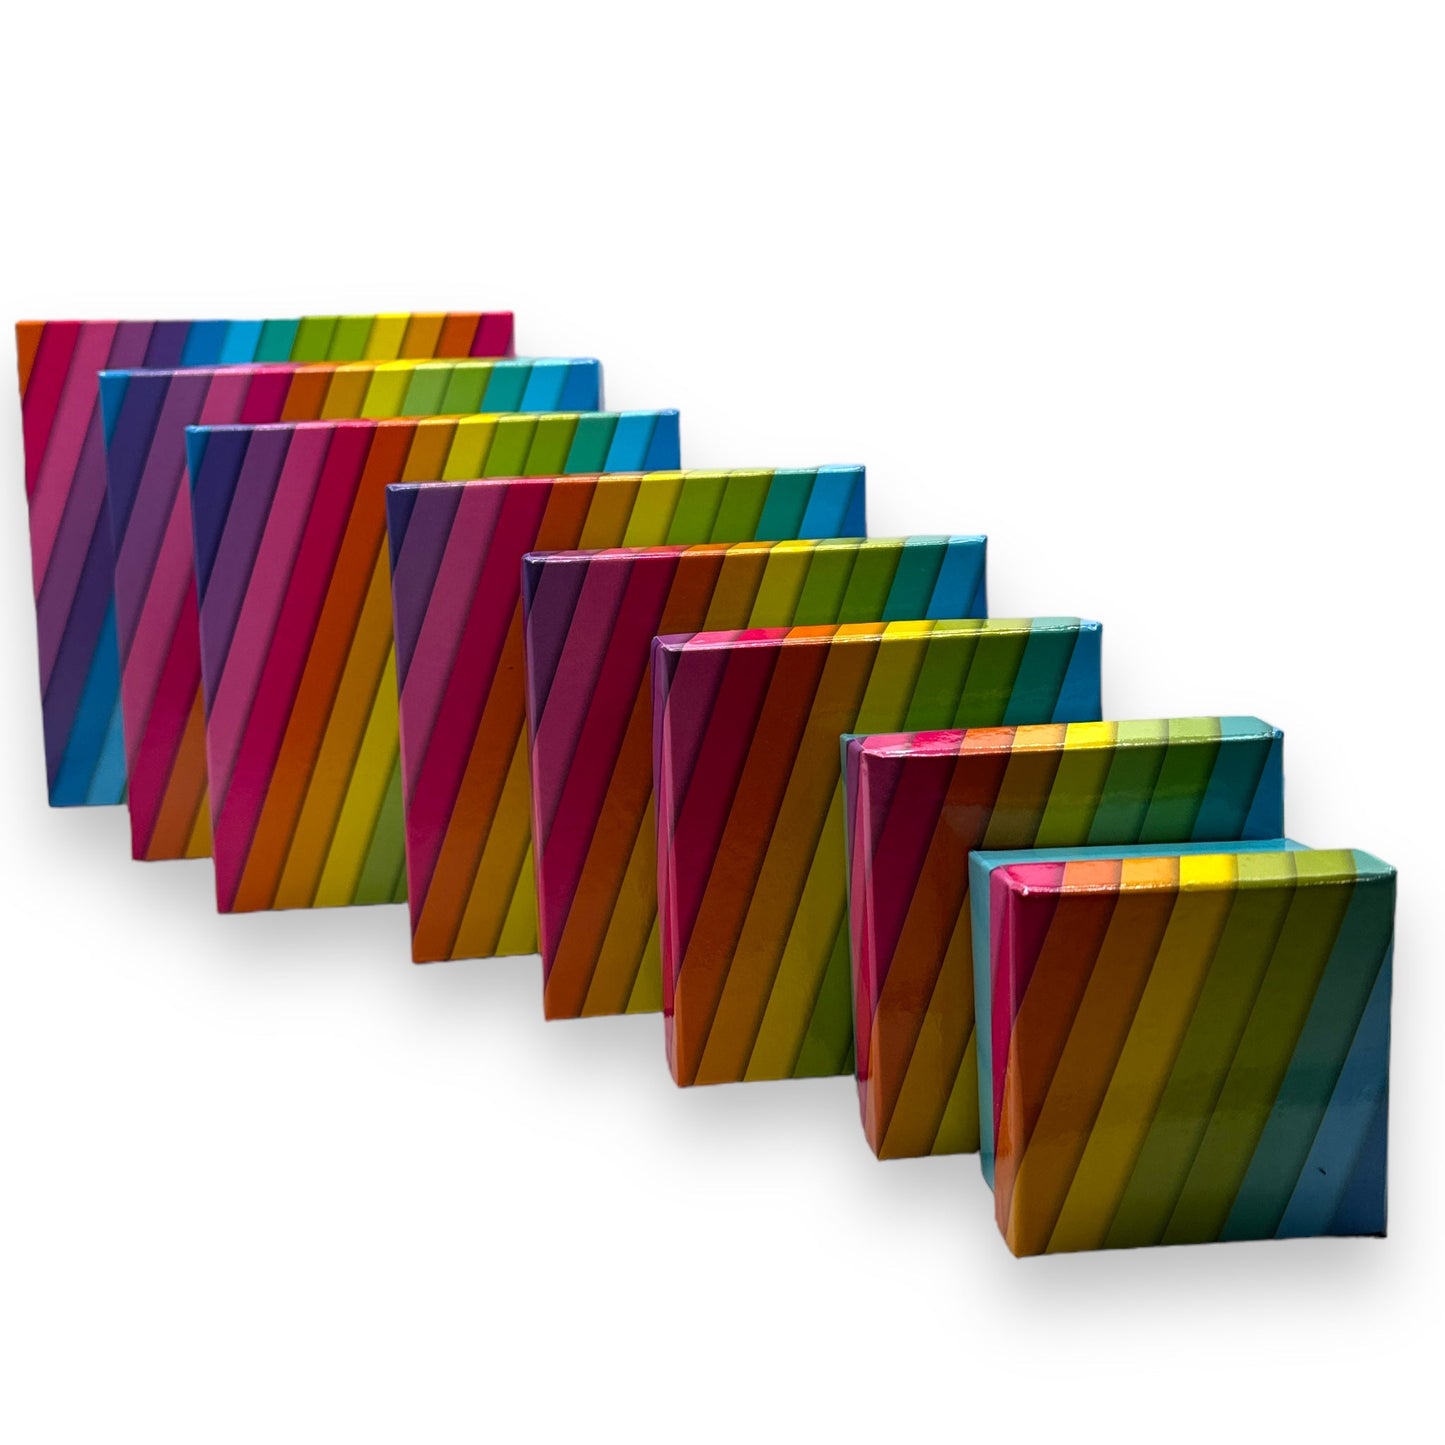 Rainbow Cardboard Box - 12x5.2 cm - Add Color and Style to Your Storage Space